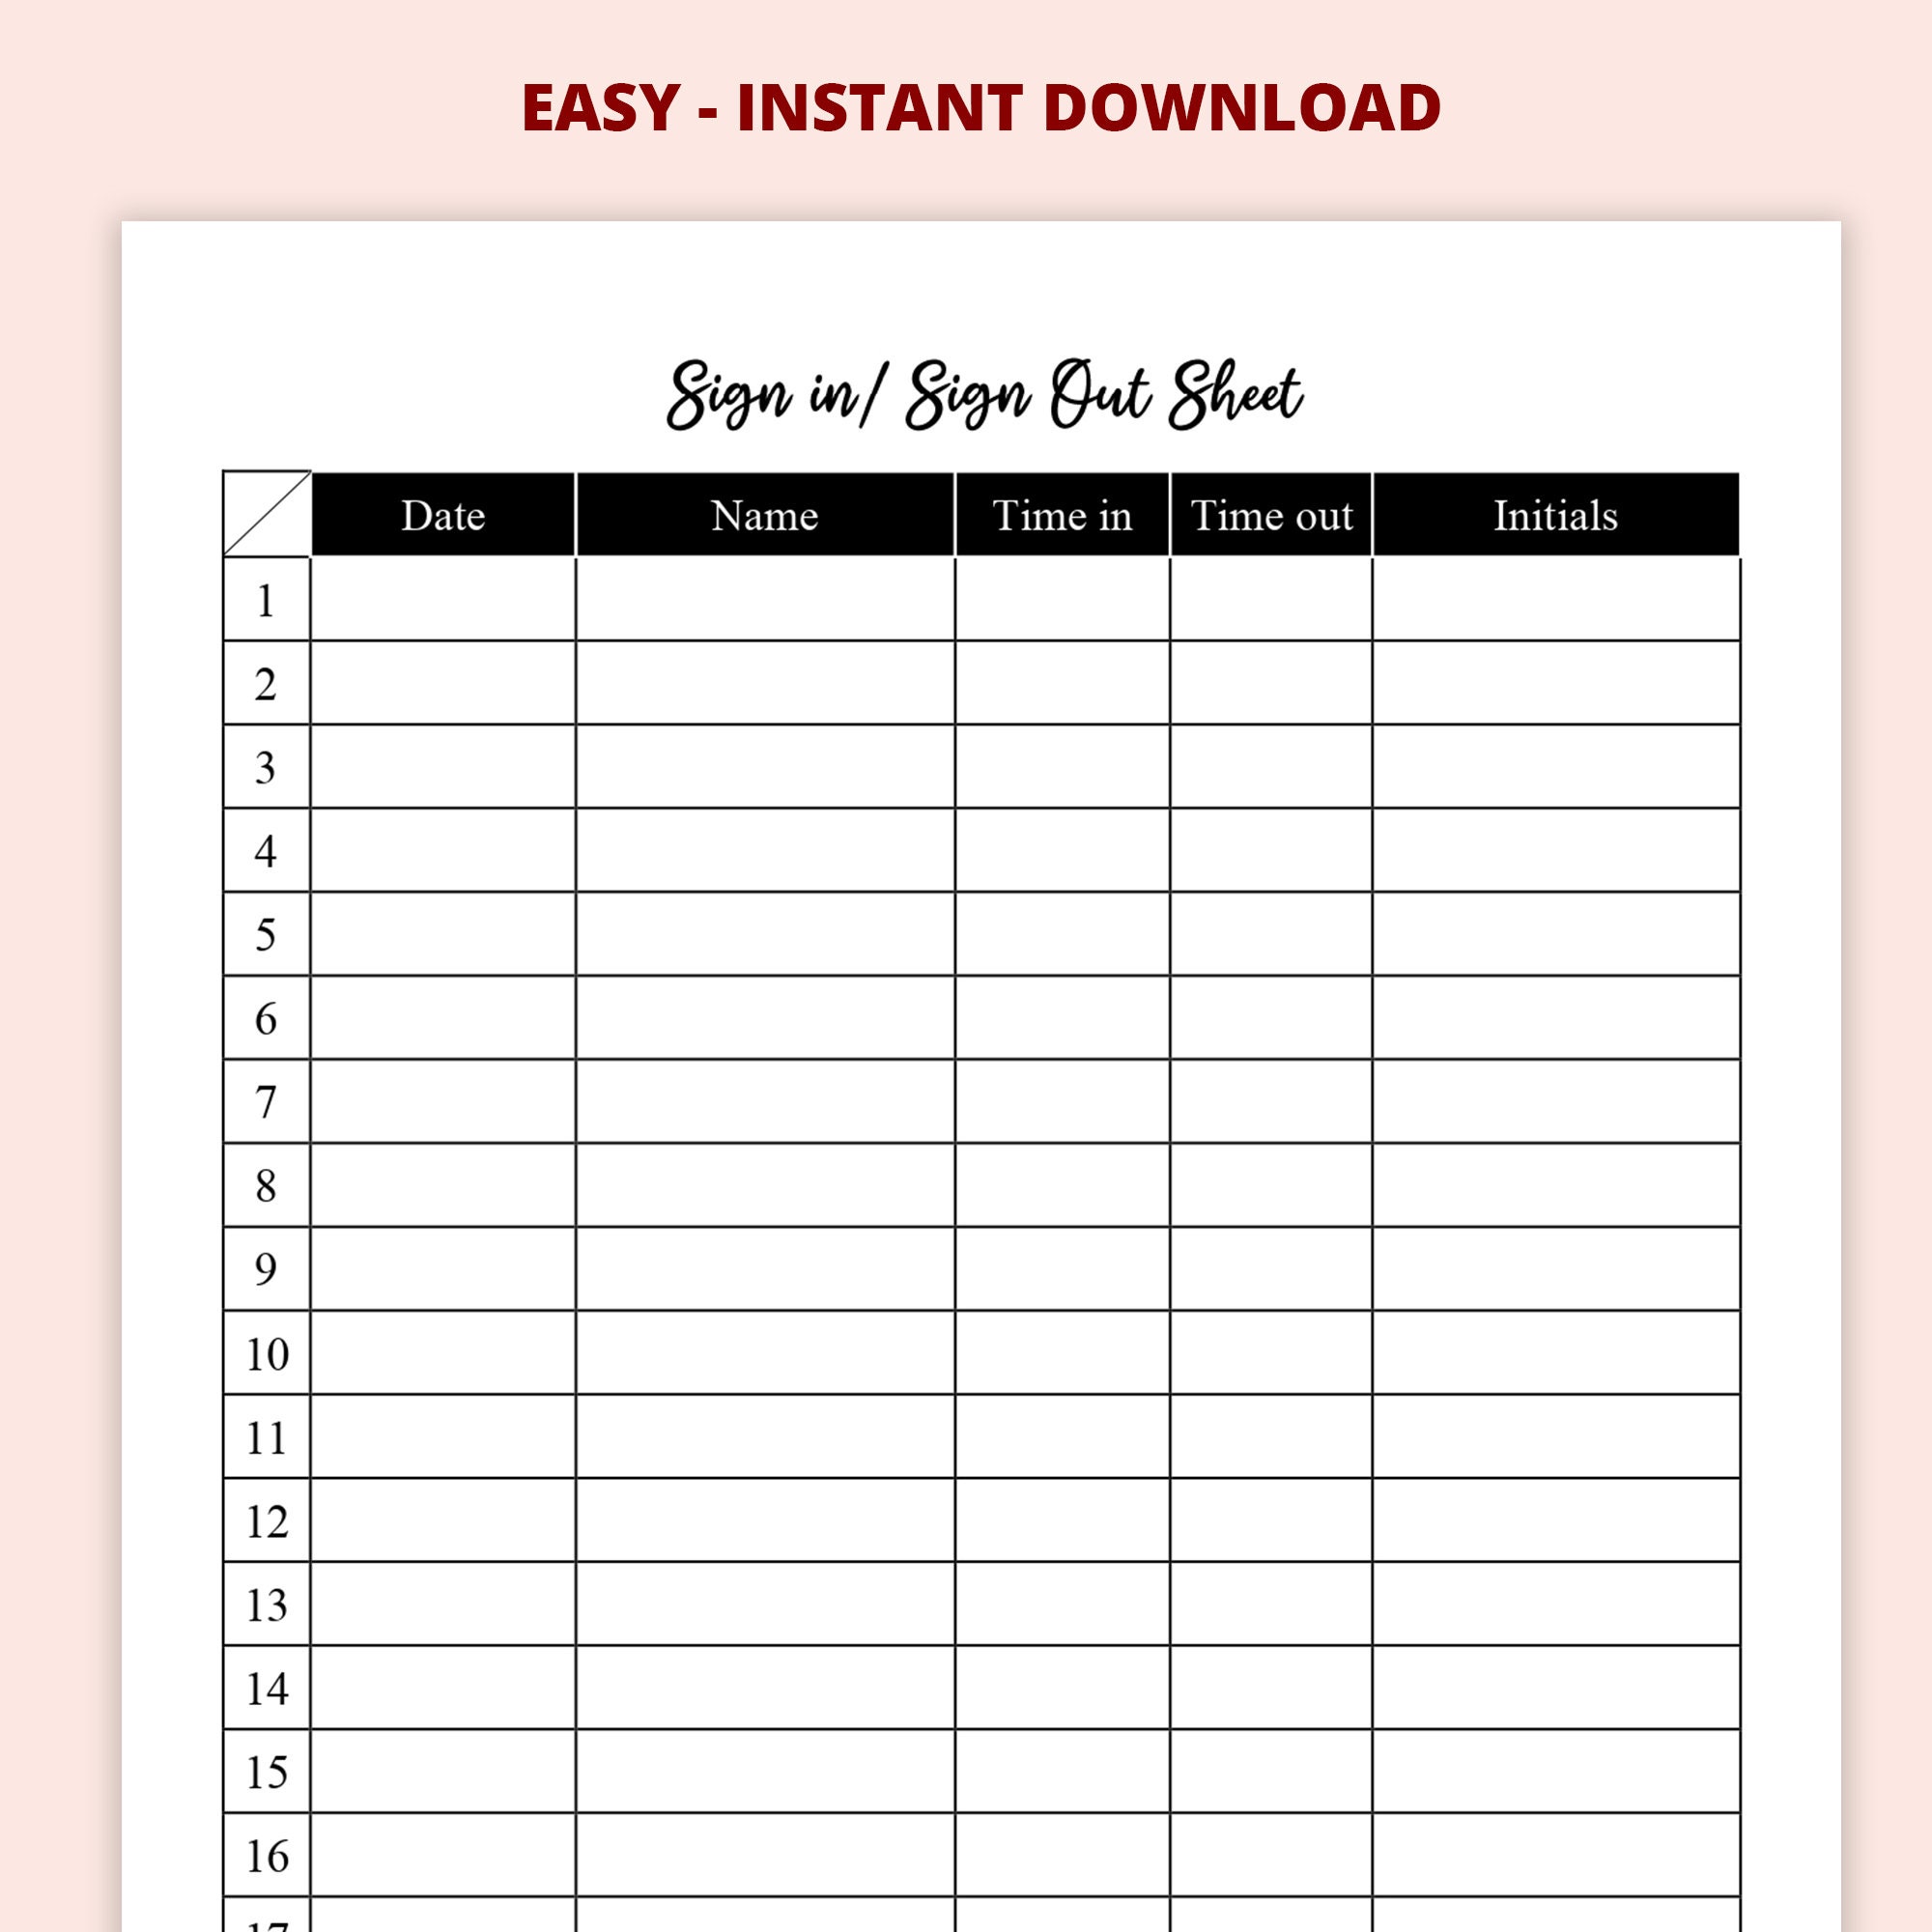 sign-in-sign-out-sheet-template-printable-editable-sign-in-sign-out